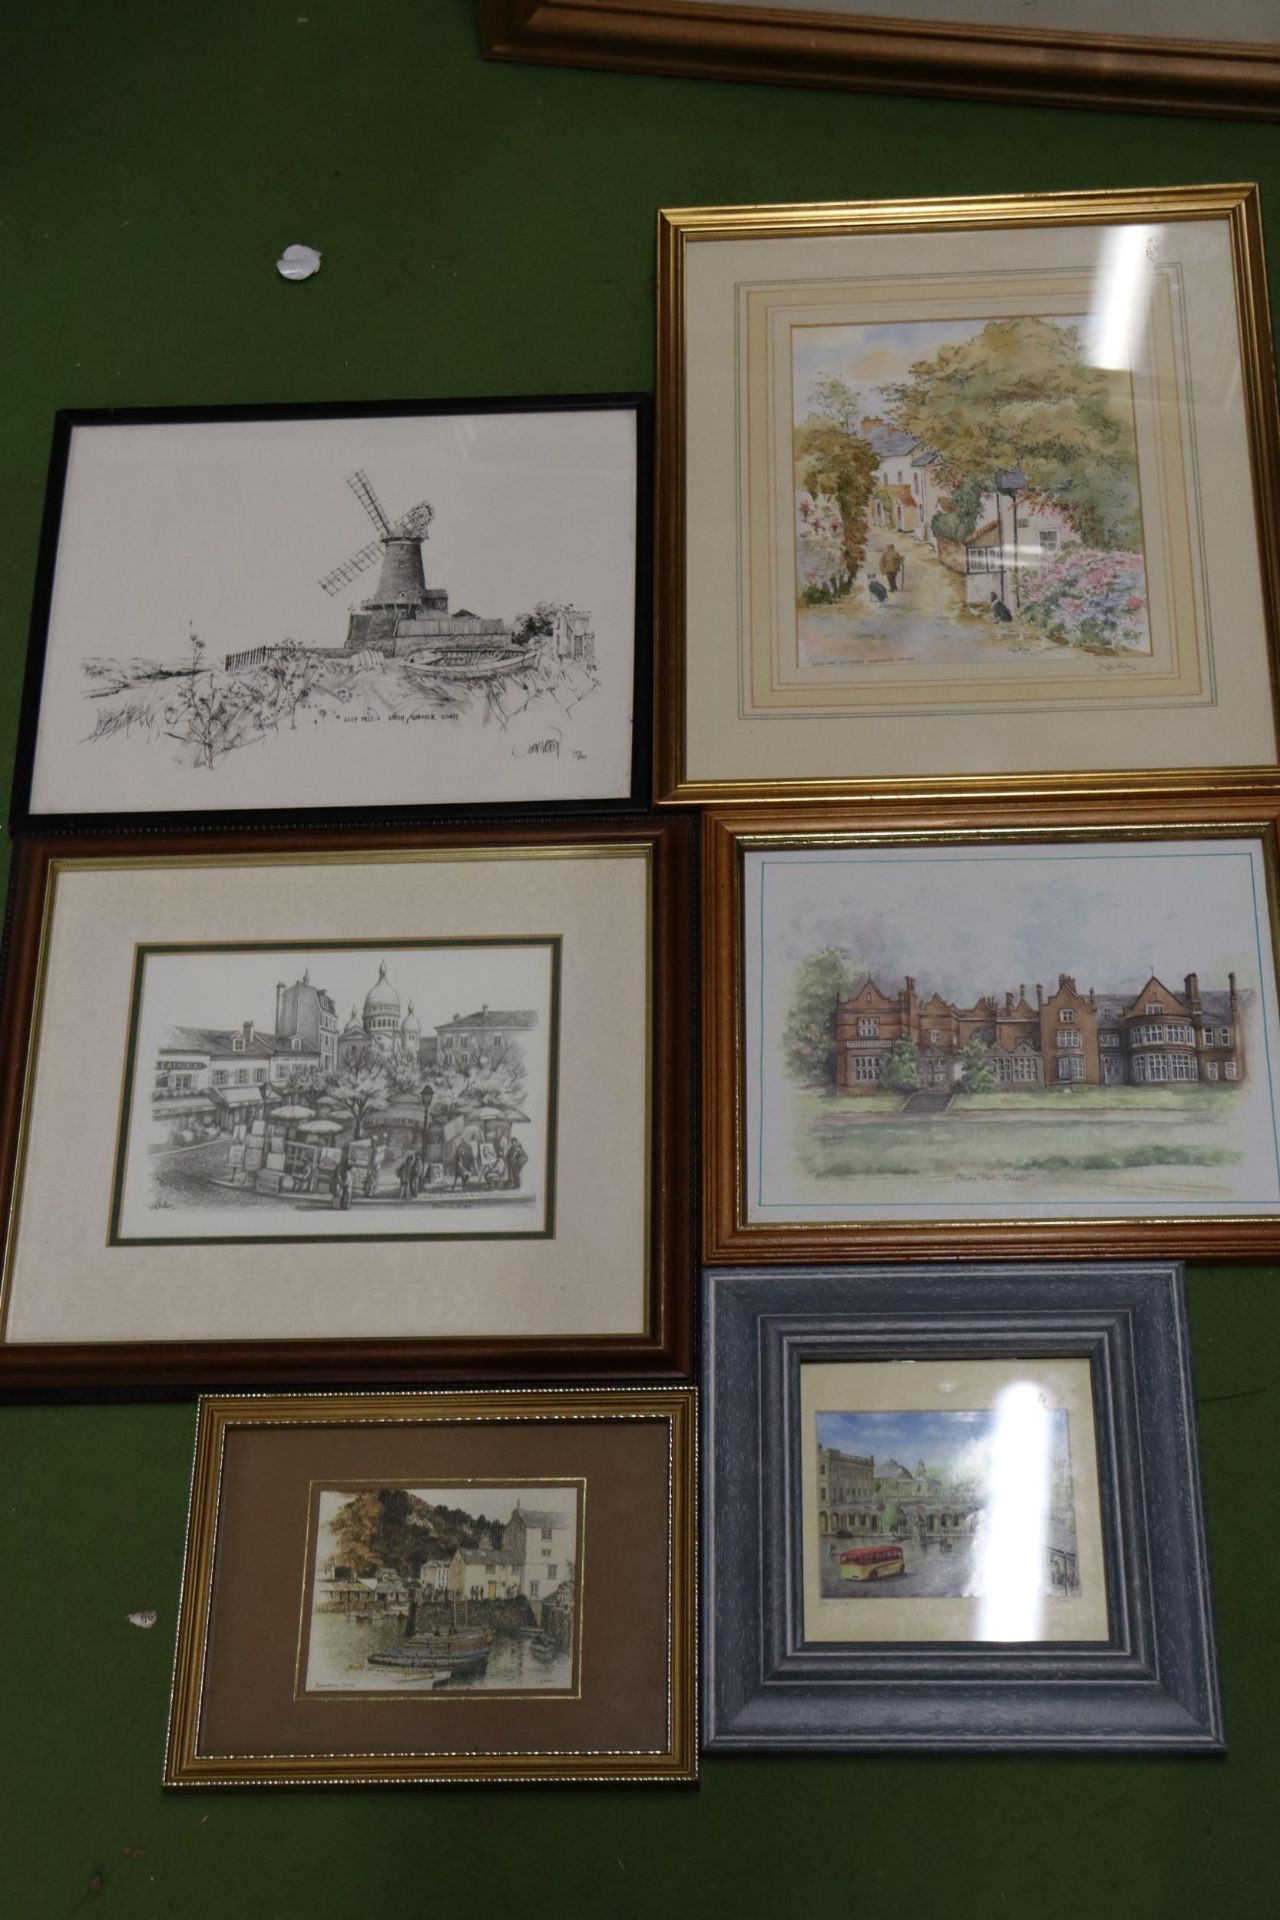 SIX VARIOUS FRAMED PRINTS TO INCLUDE BUXTON SCENE, CLEY MILL NORTH NORFOLK COAST, ROCKHAM COTTAGES